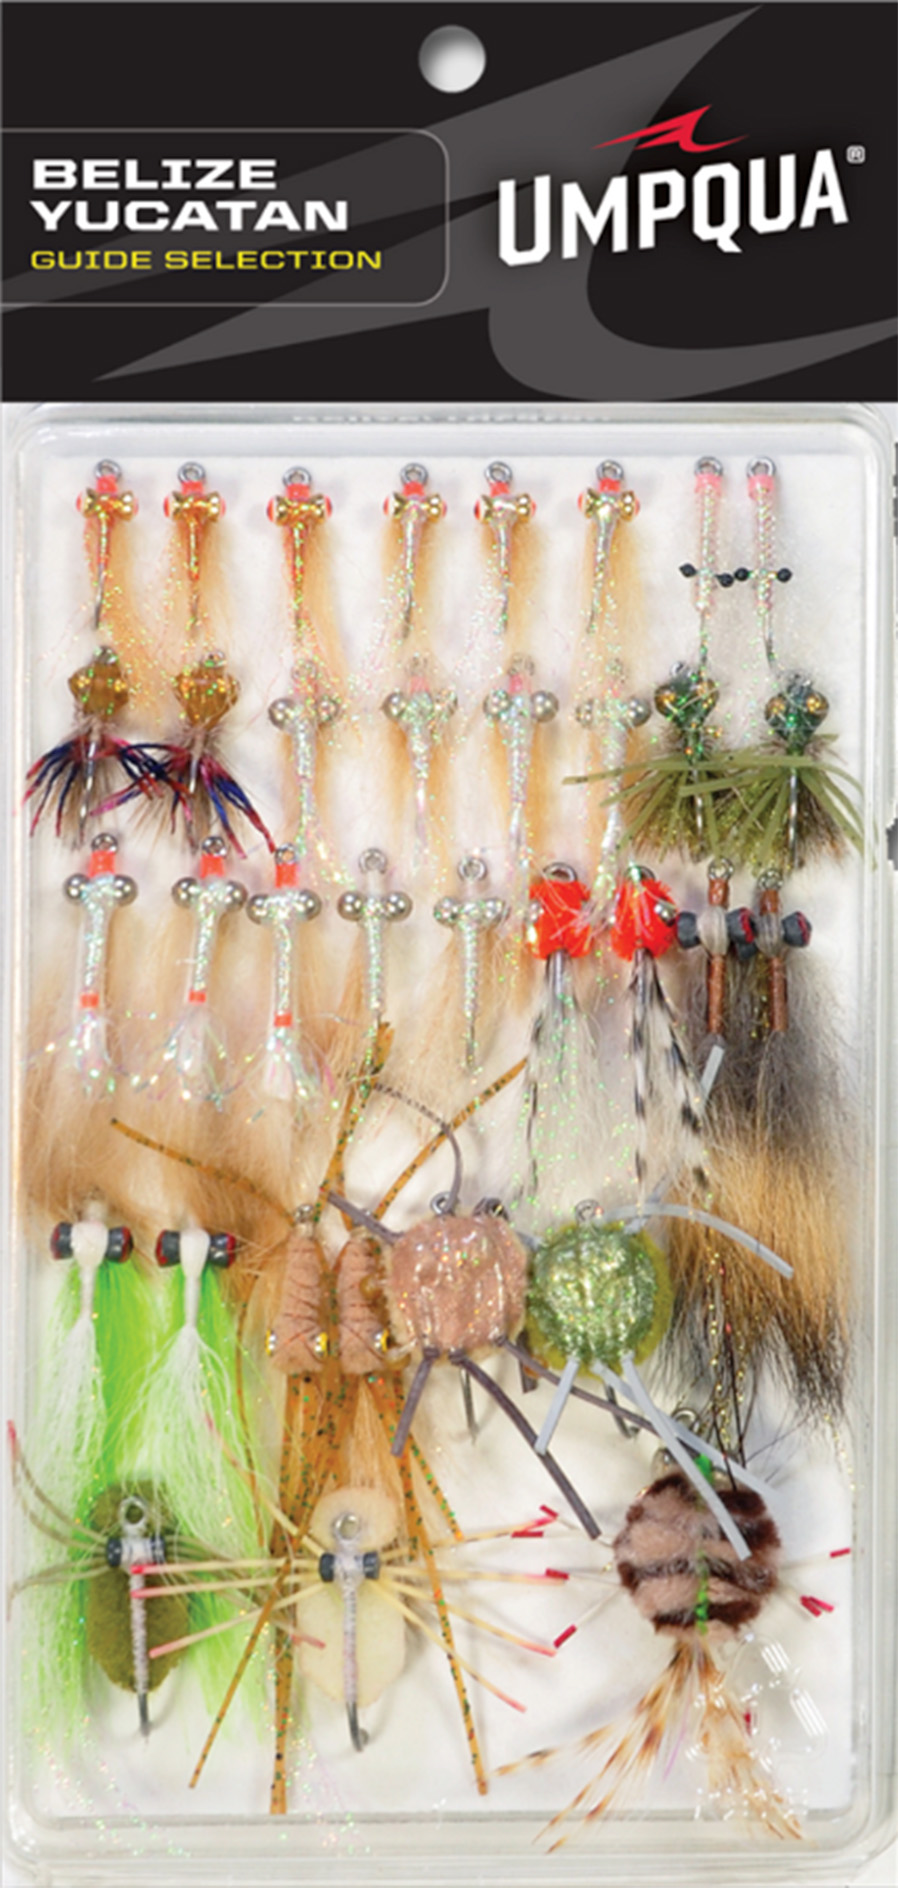 Umpqua's Belize/Yucatan Fly Selection, featuring essential flies for effective fly fishing in Belize and Yucatan regions.